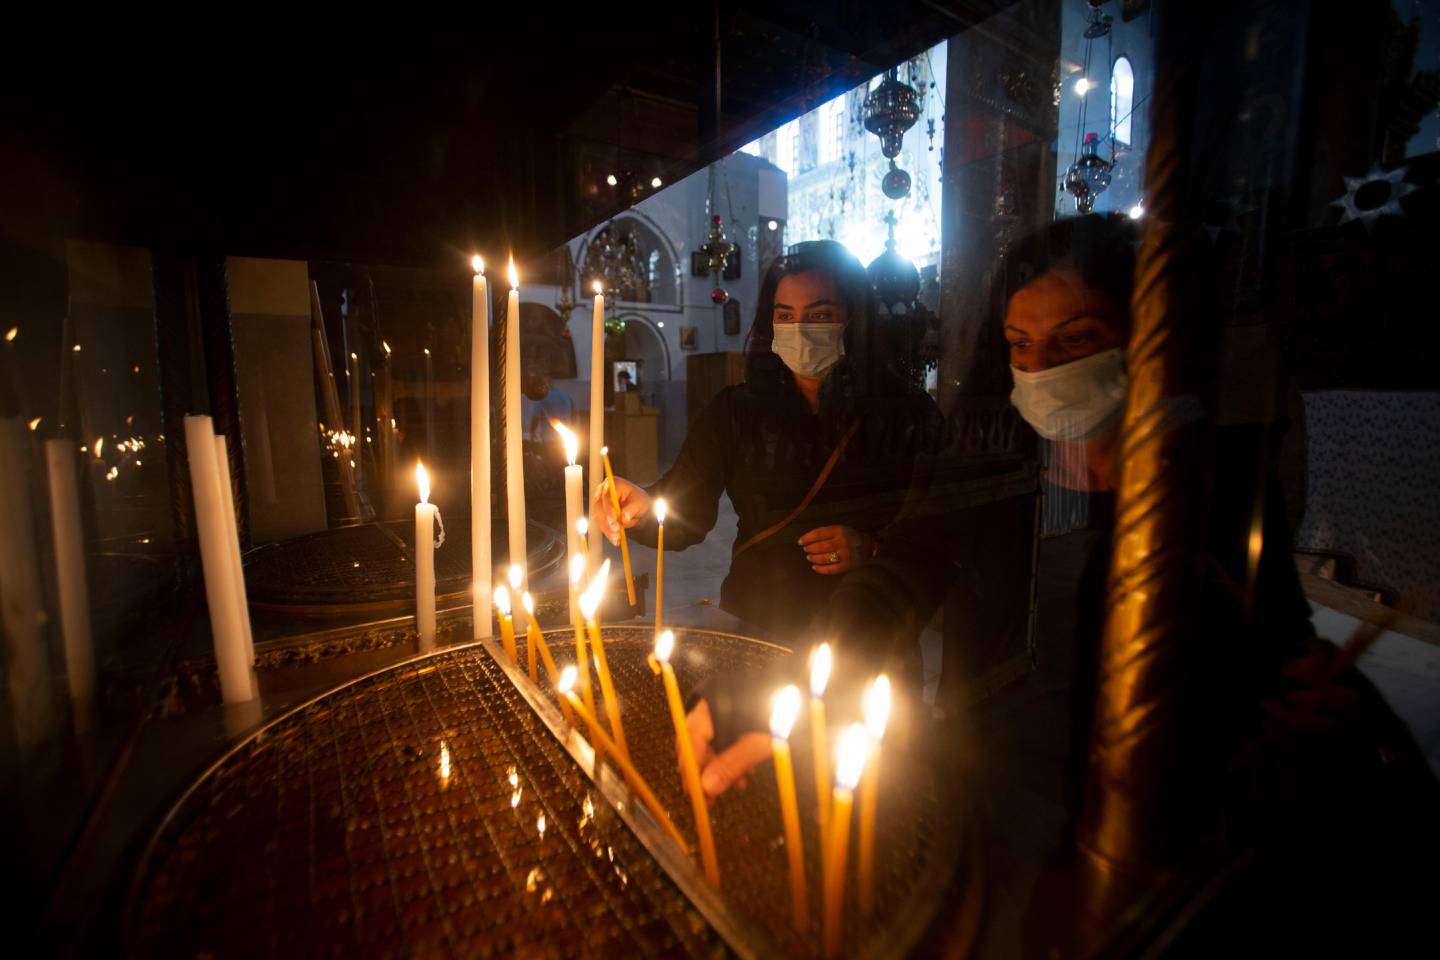 Christian worshippers light candles in the Church of the Nativity, traditionally believed to be the birthplace of Jesus Christ, in the West Bank city of Bethlehem, Monday, Nov. 23, 2020. Normally packed with tourists from around the world at this time of year, Bethlehem resembles a ghost town  with hotels, restaurants and souvenir shops shuttered by the pandemic. (AP Photo/Majdi Mohammed)